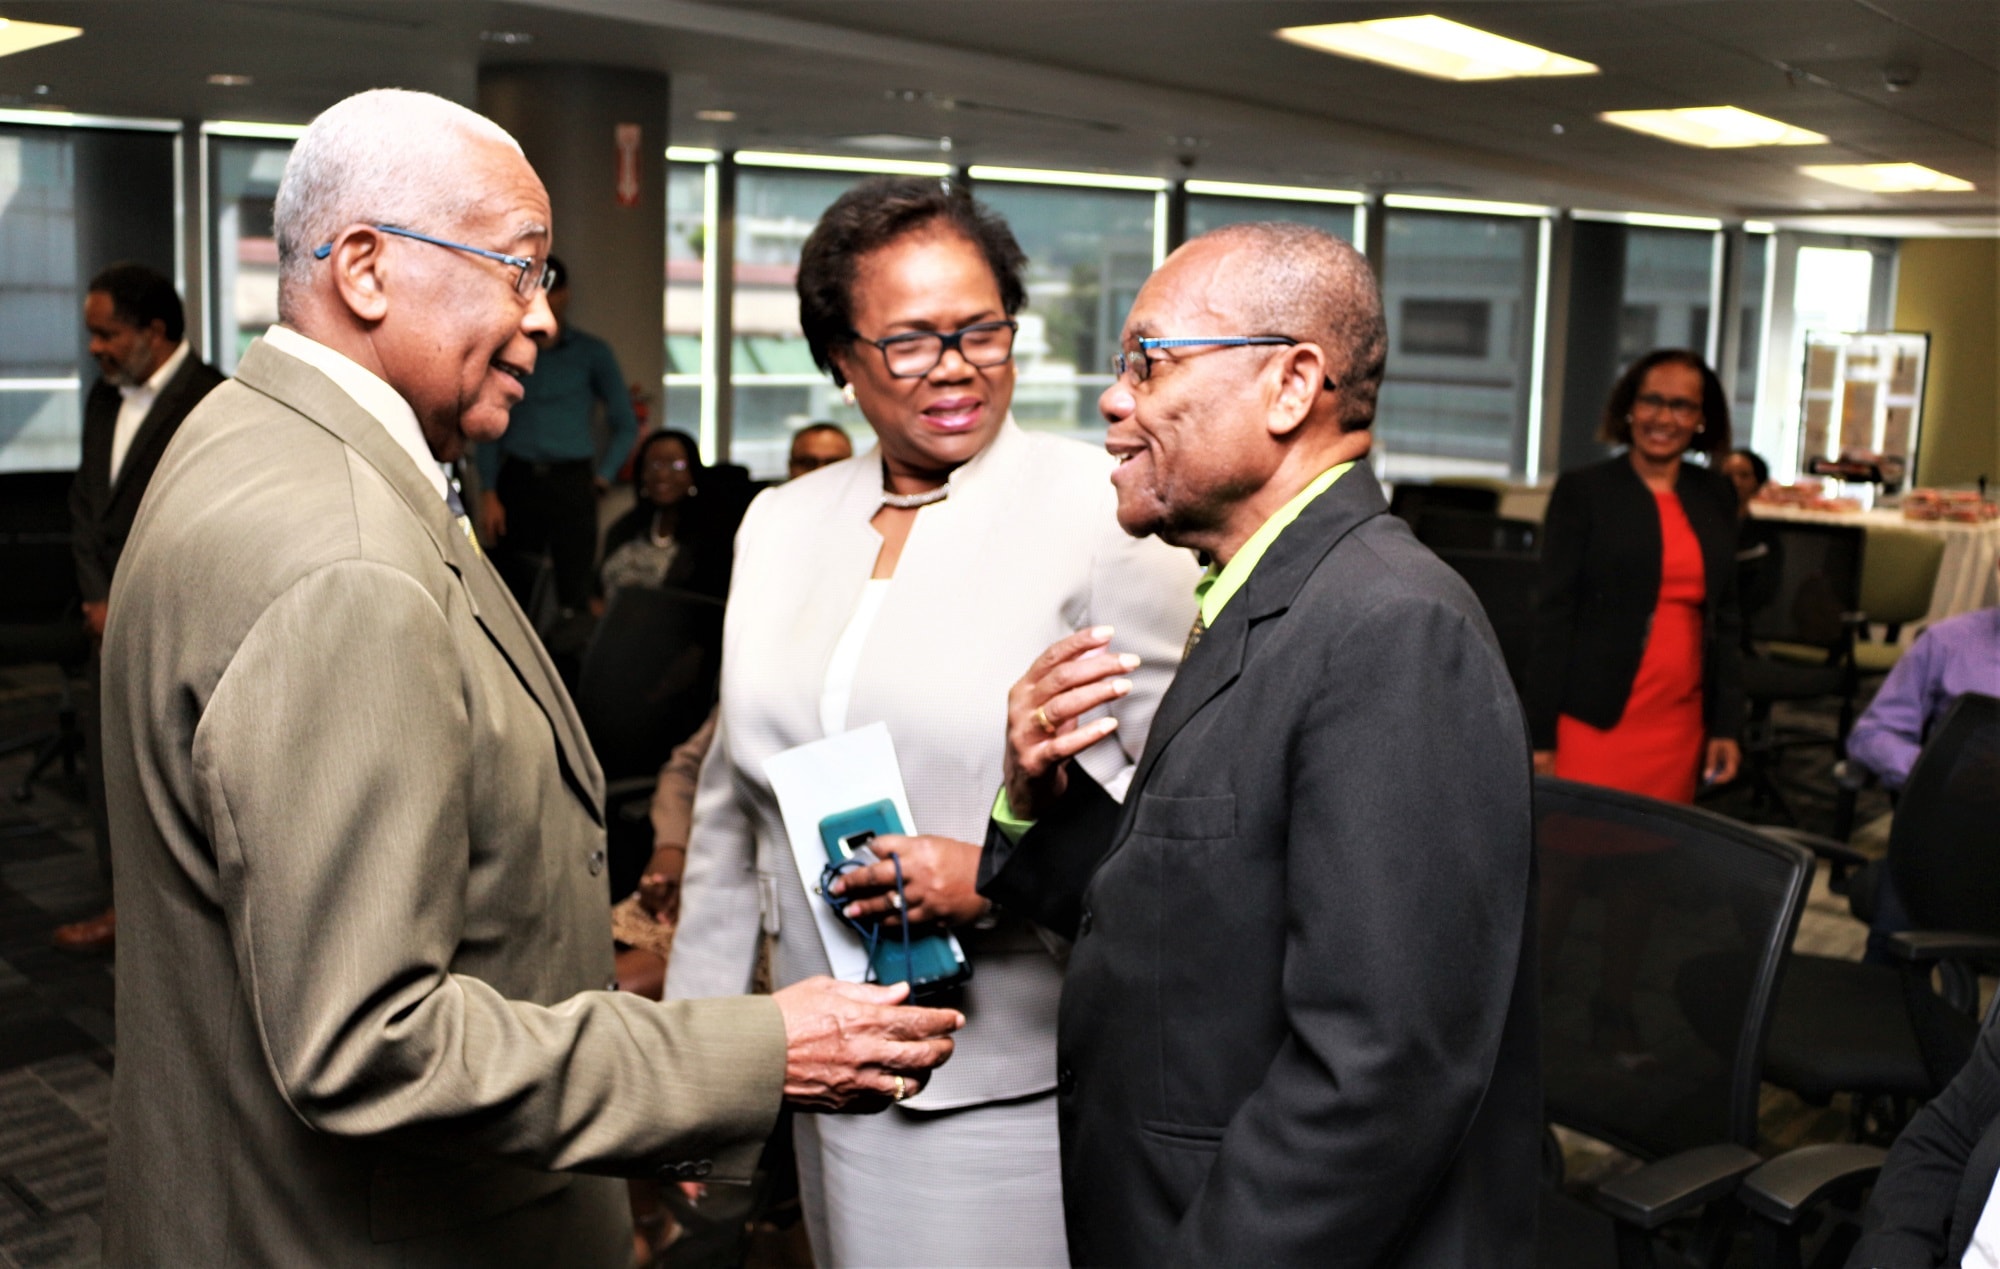 The Hon. Minister Garcia shares a light moment with Prof. Mellowes and Mrs. Lord-Lewis